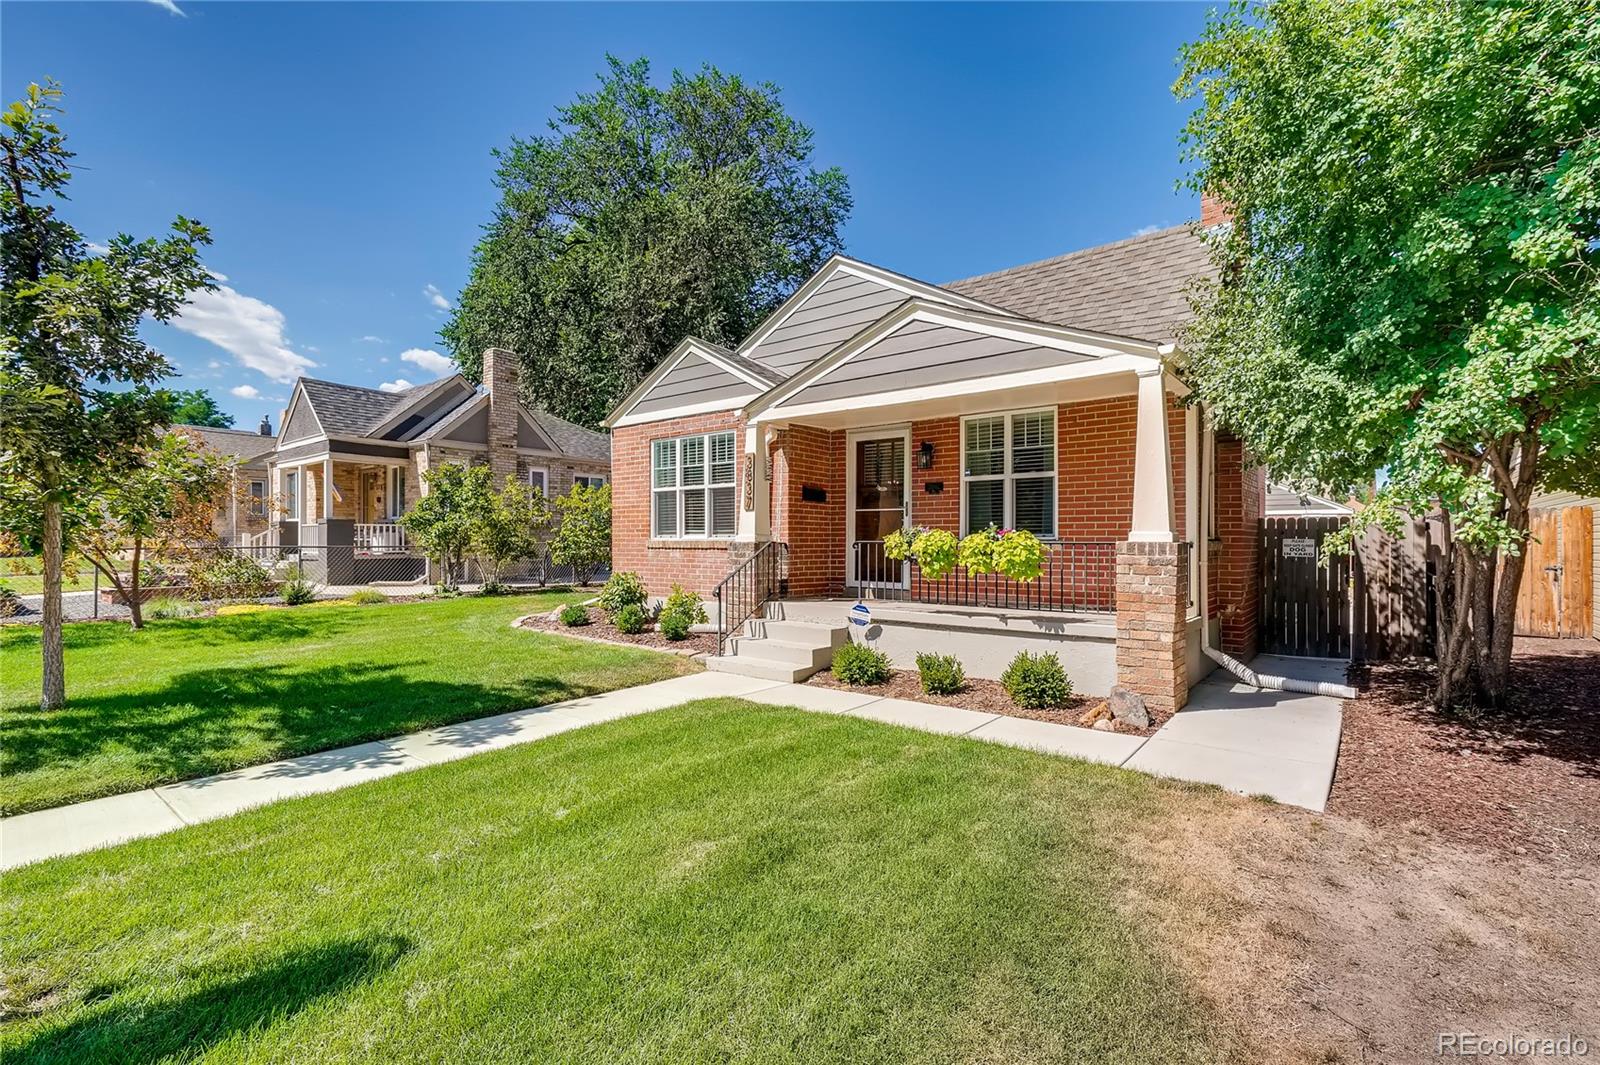 3837 Lincoln, Englewood, CO